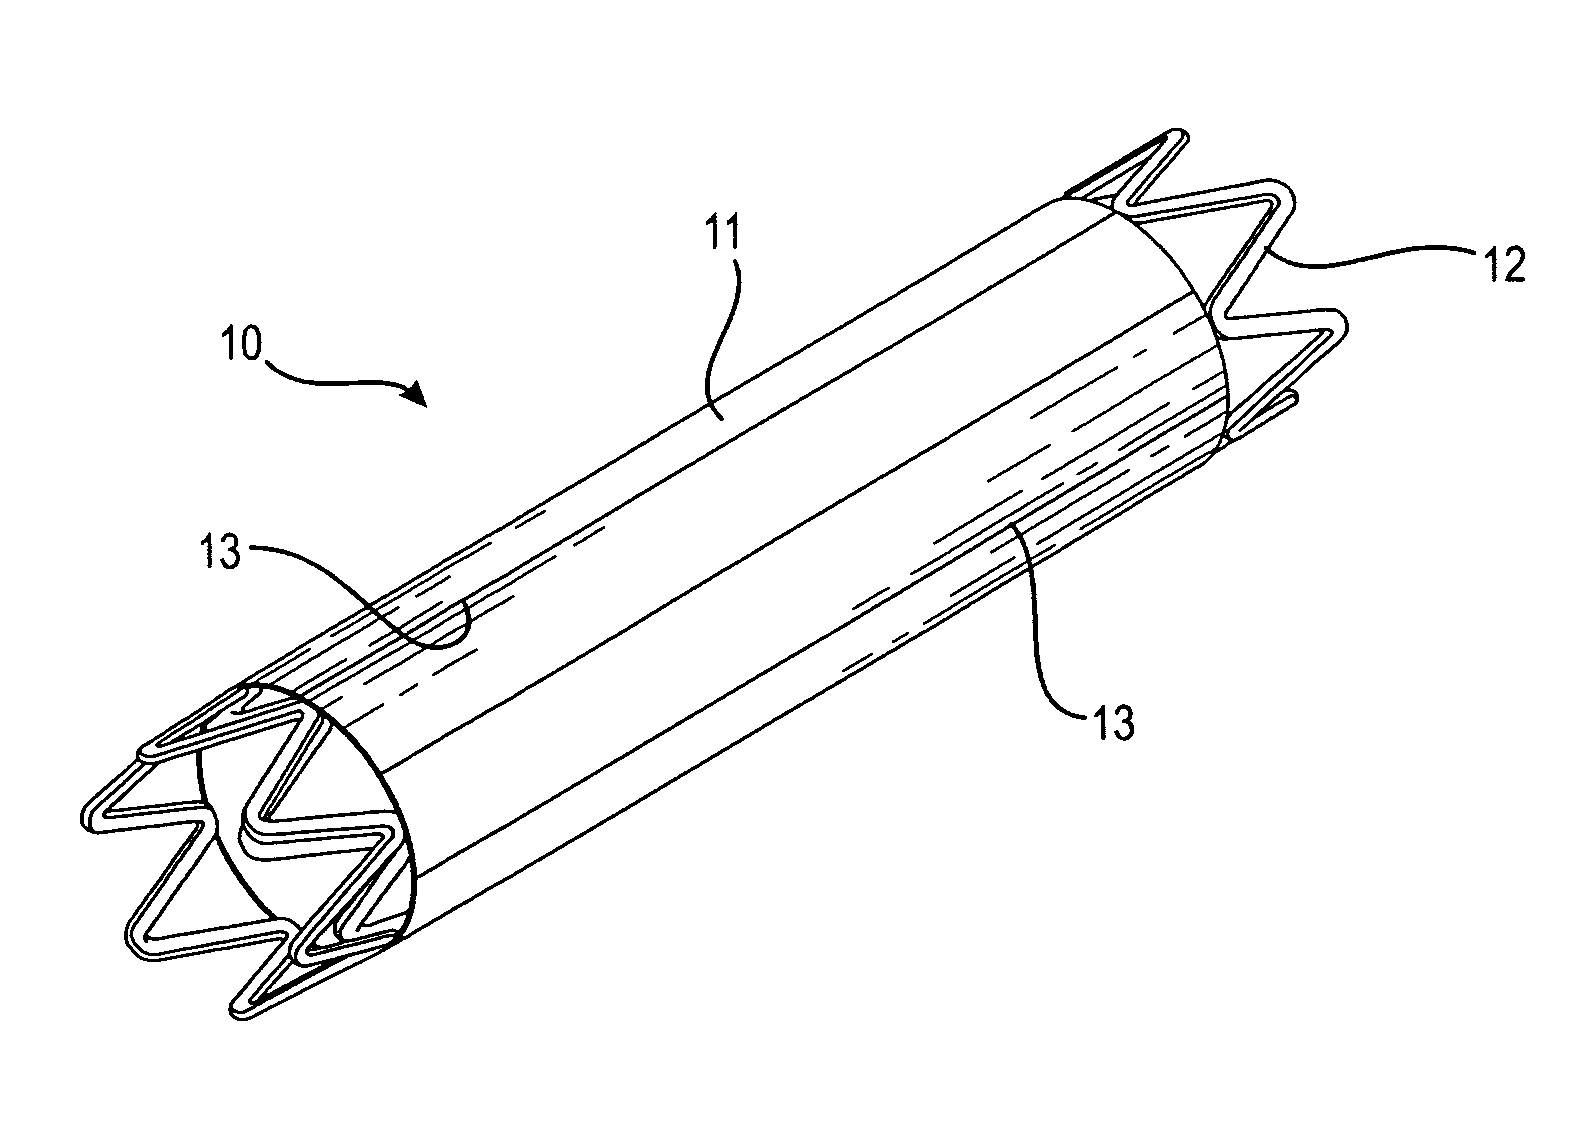 Medical stent and devices for localized treatment of disease